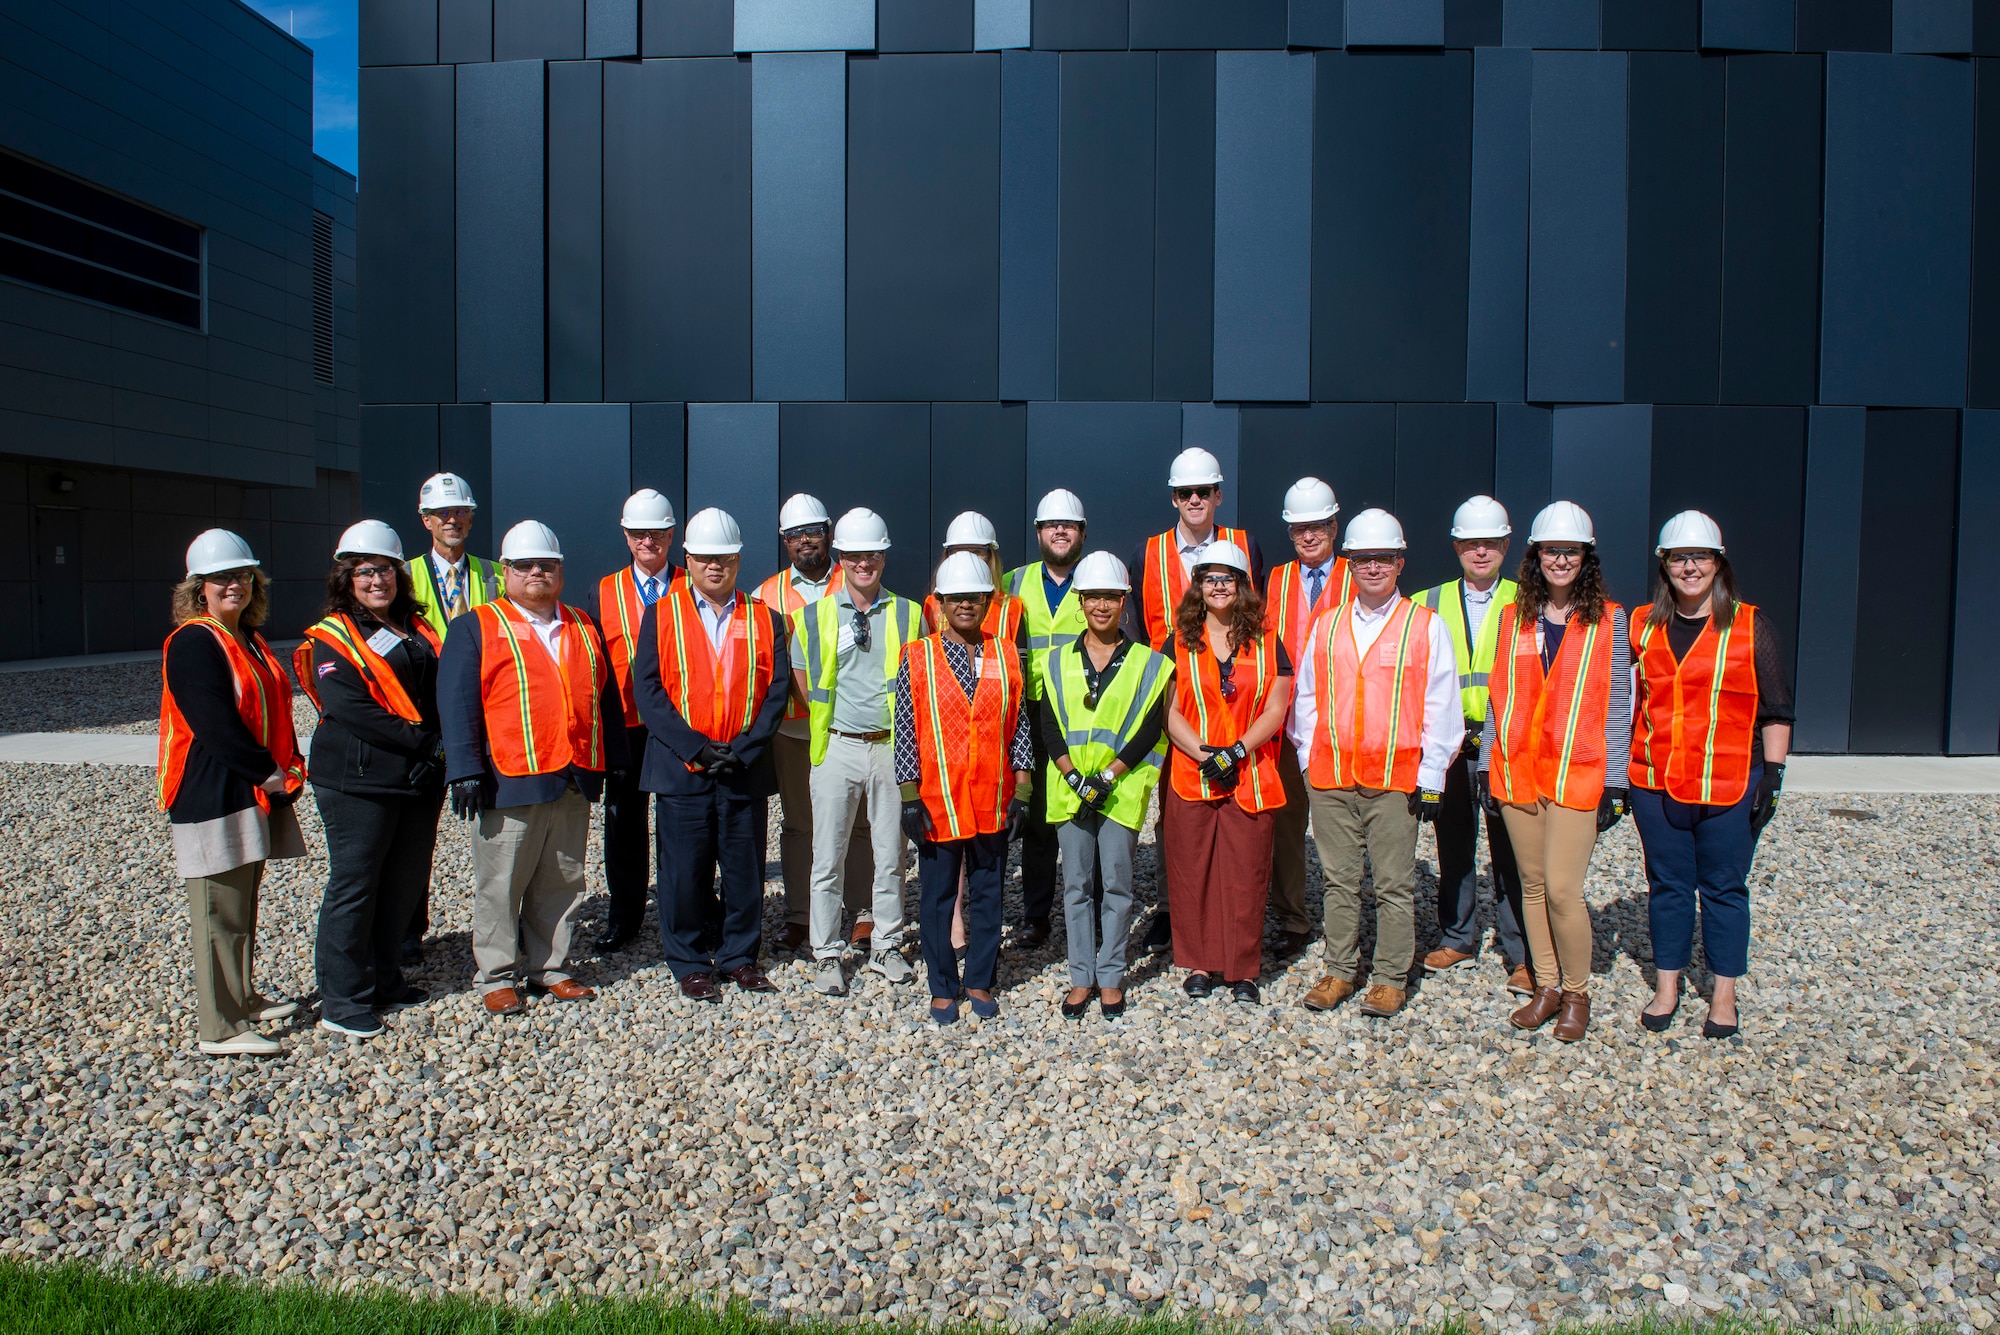 A delegation of congressional staffers pose for a photo in front of the new National and Space Intelligence Center’s Intelligence Production Center III during their visit to Wright-Patterson Air Force Base, Ohio, August 29, 2023. The purpose of this visit and tour was to educate and inform on Wright-Patterson Air Force Base, its tenants’ missions, and the synergy between them.